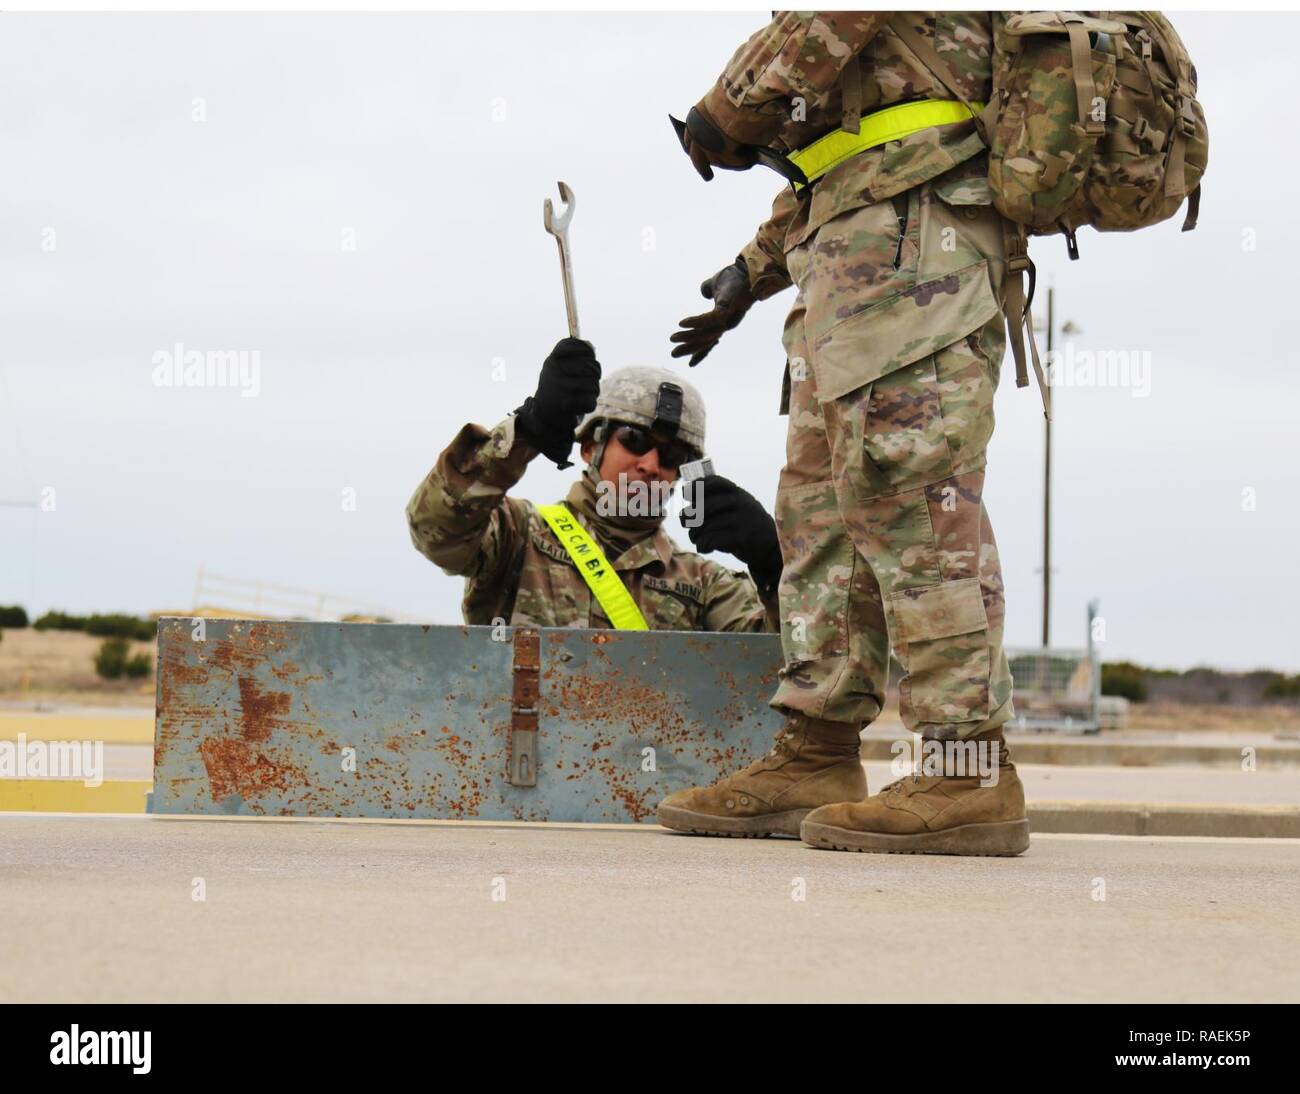 Chief Warrant Officer 2 Francisco Latimer, 68th Chemical Company, 2nd Chemical Battalion, 48th Chemical Brigade, hands a tool to a Soldier while checking identification, Dec. 12, 2018, Fort Hood Texas. Soldiers were checking out tools to assist with tie down of vehicles on the rail. Stock Photo